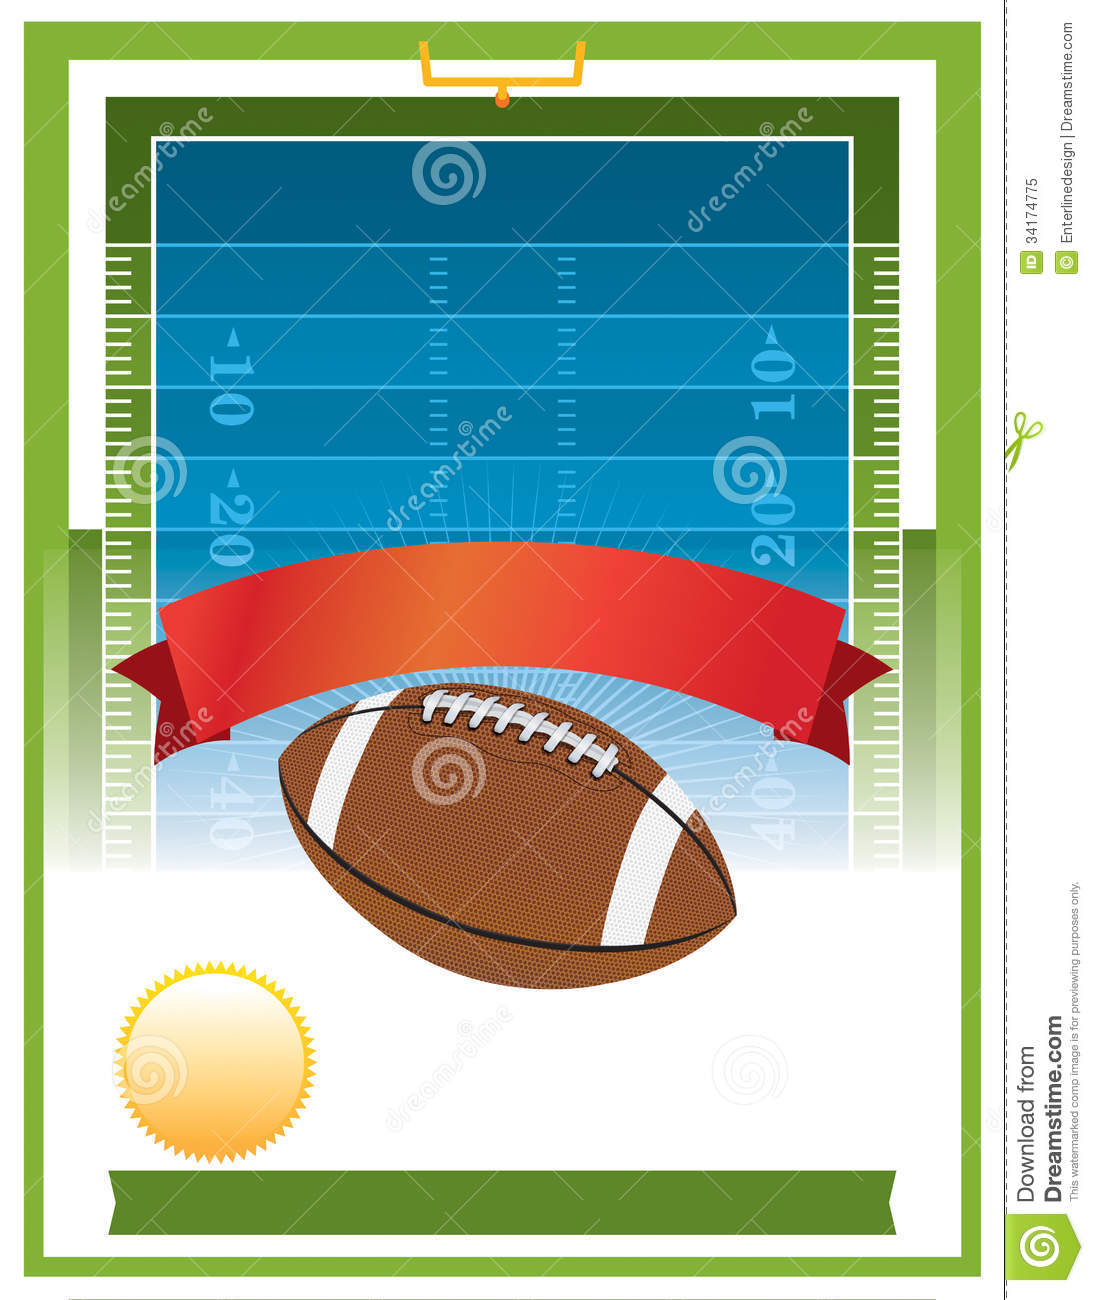 American Football Tailgate Party Flyer Design Royalty Free Stock Photo    